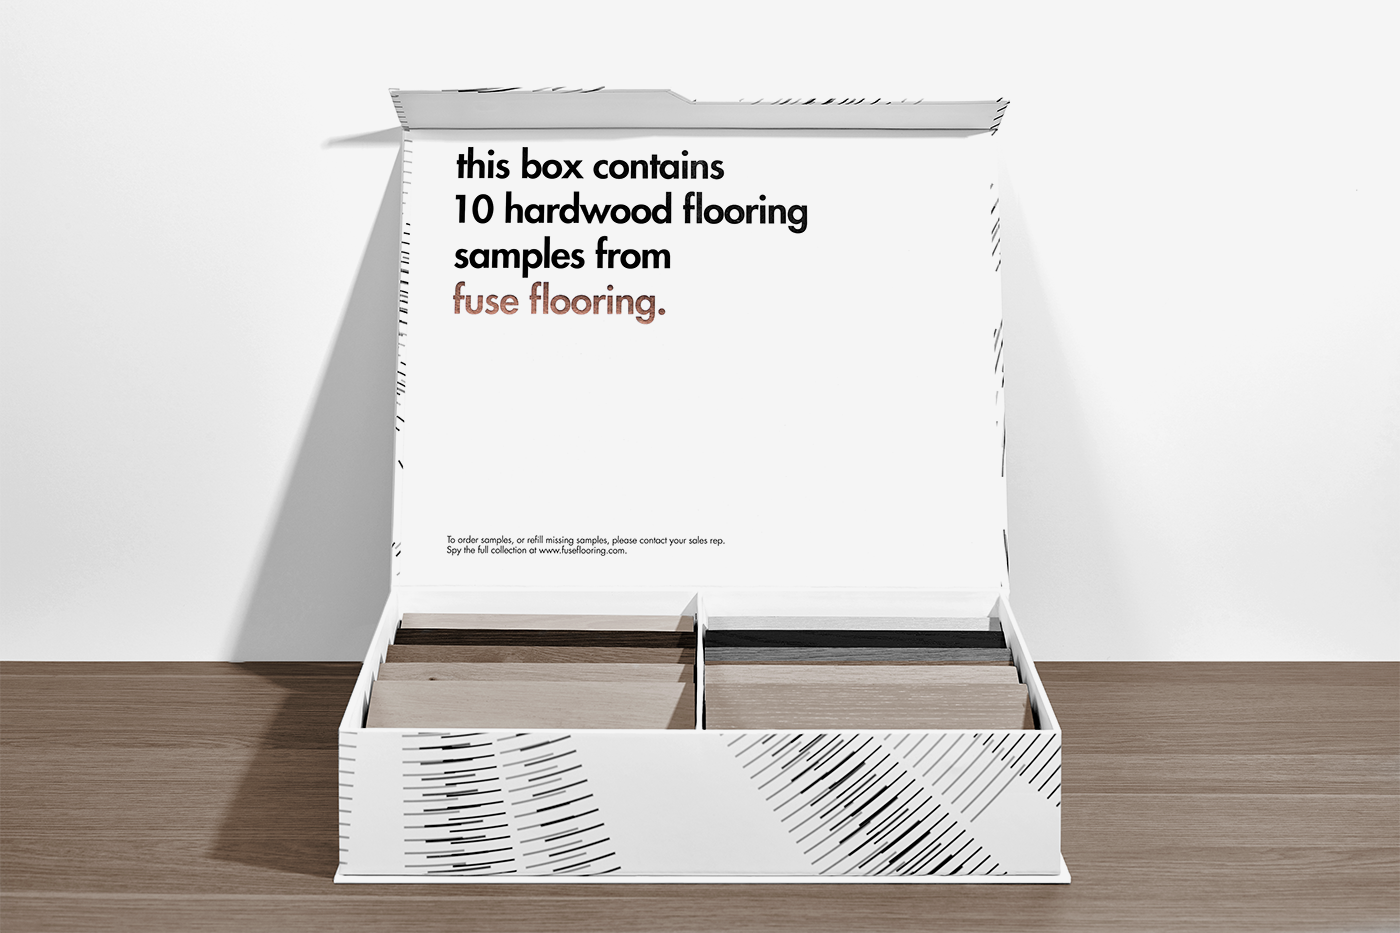 fuseflooring Anagrama Packaging box wood pattern BuisnessCards design White copperfoil